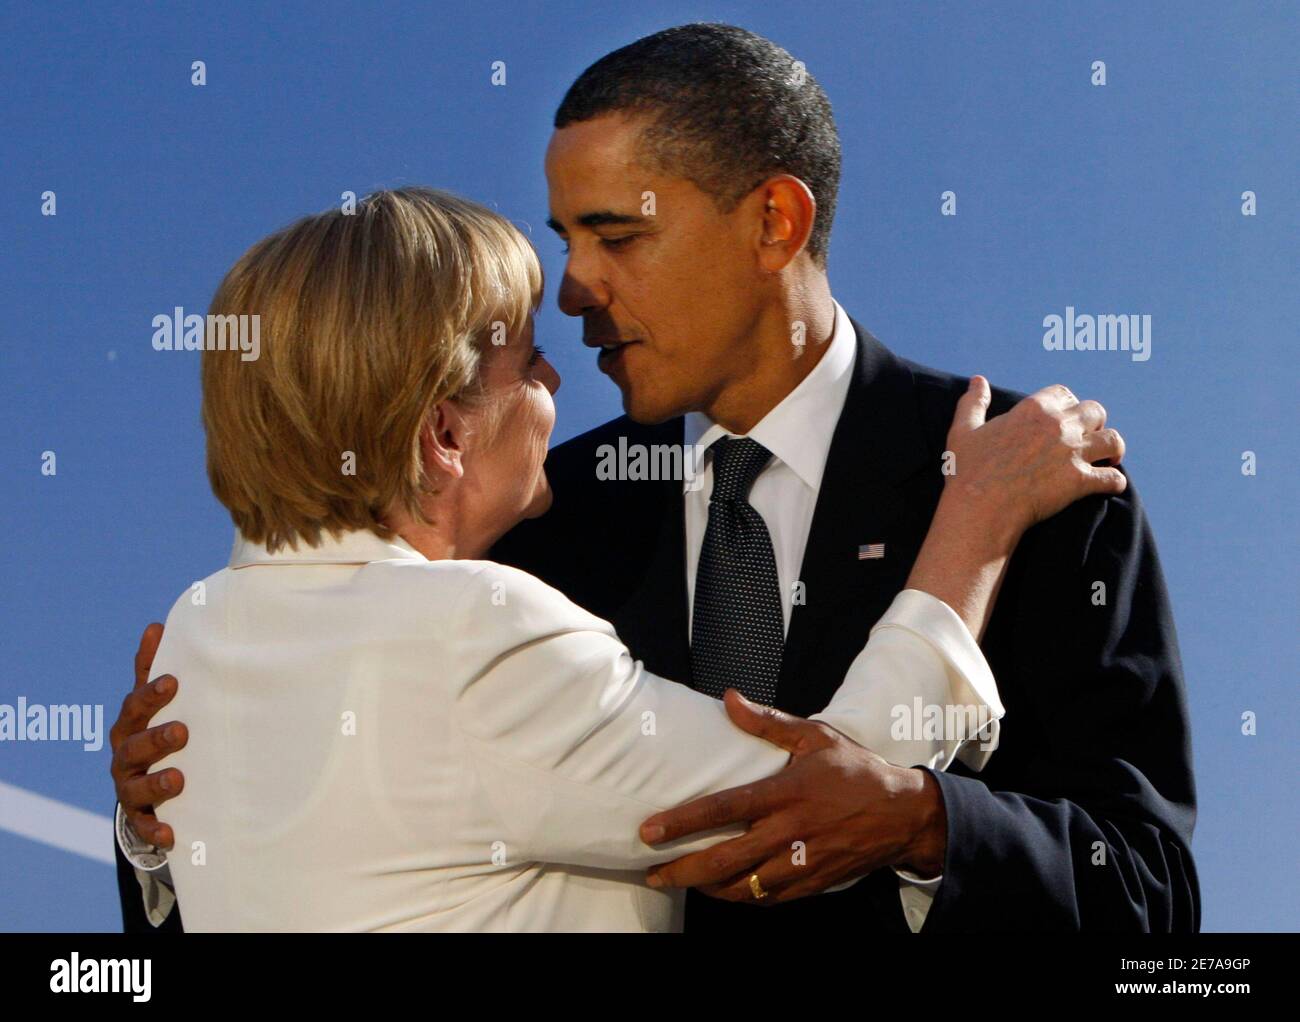 German Chancellor Angela Merkel talks with U.S. President Barack Obama as they arrive at the Phipps Conservatory for an opening reception and working dinner for heads of delegation at the Pittsburgh G20 Summit in Pittsburgh, Pennsylvania, September 24, 2009.     REUTERS/Chris Wattie (UNITED STATES POLITICS) Stock Photo